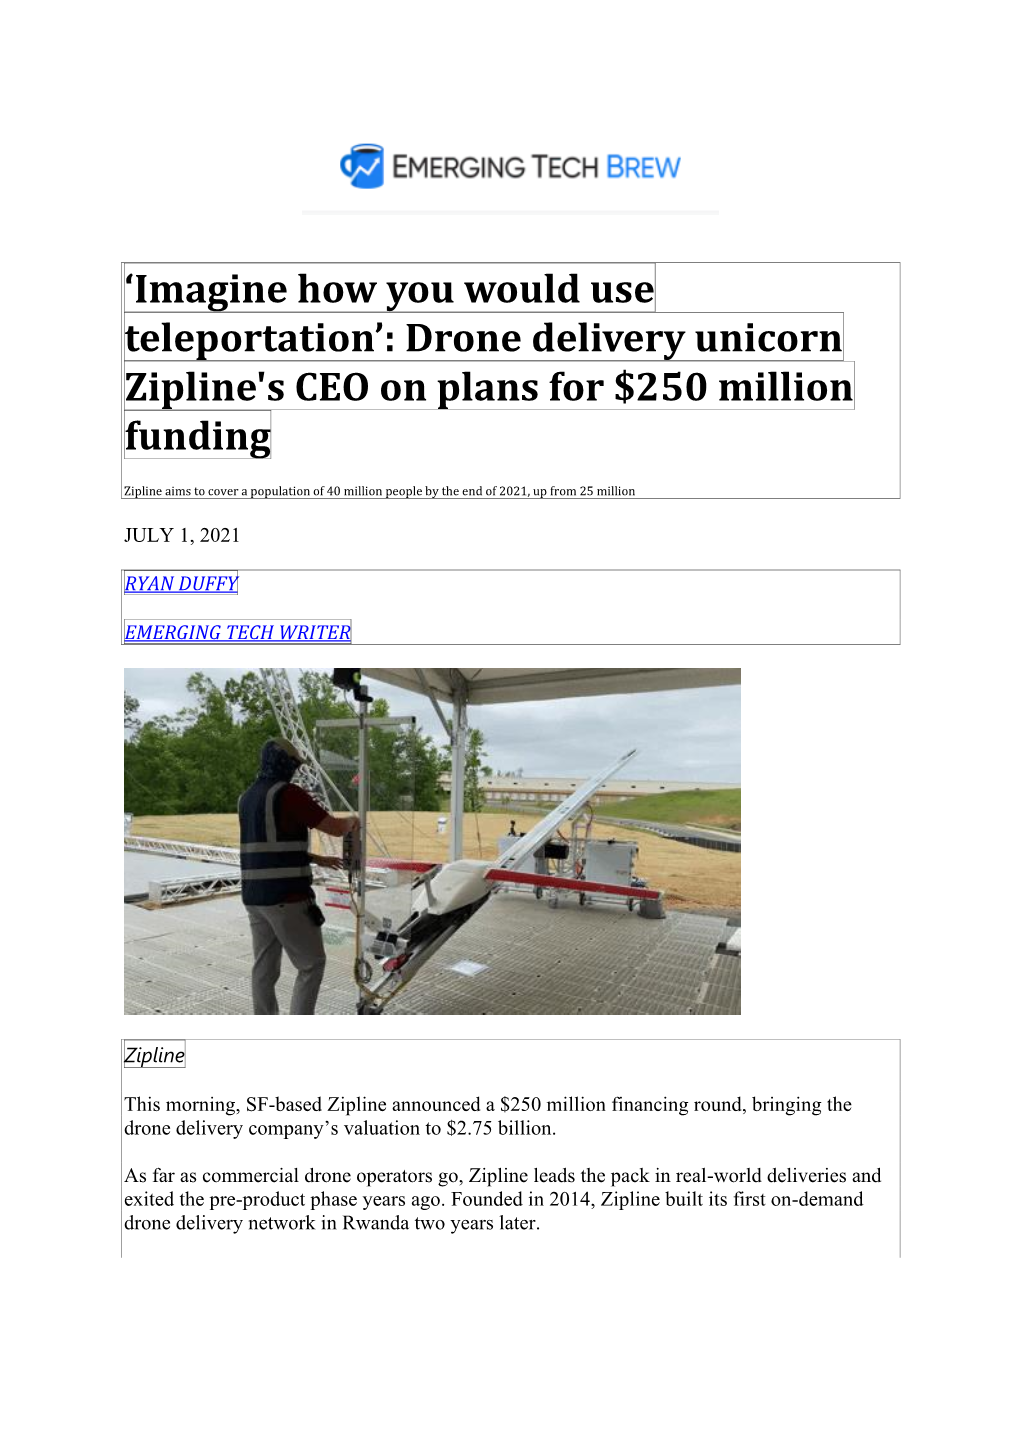 Drone Delivery Unicorn Zipline's CEO on Plans for $250 Million Funding